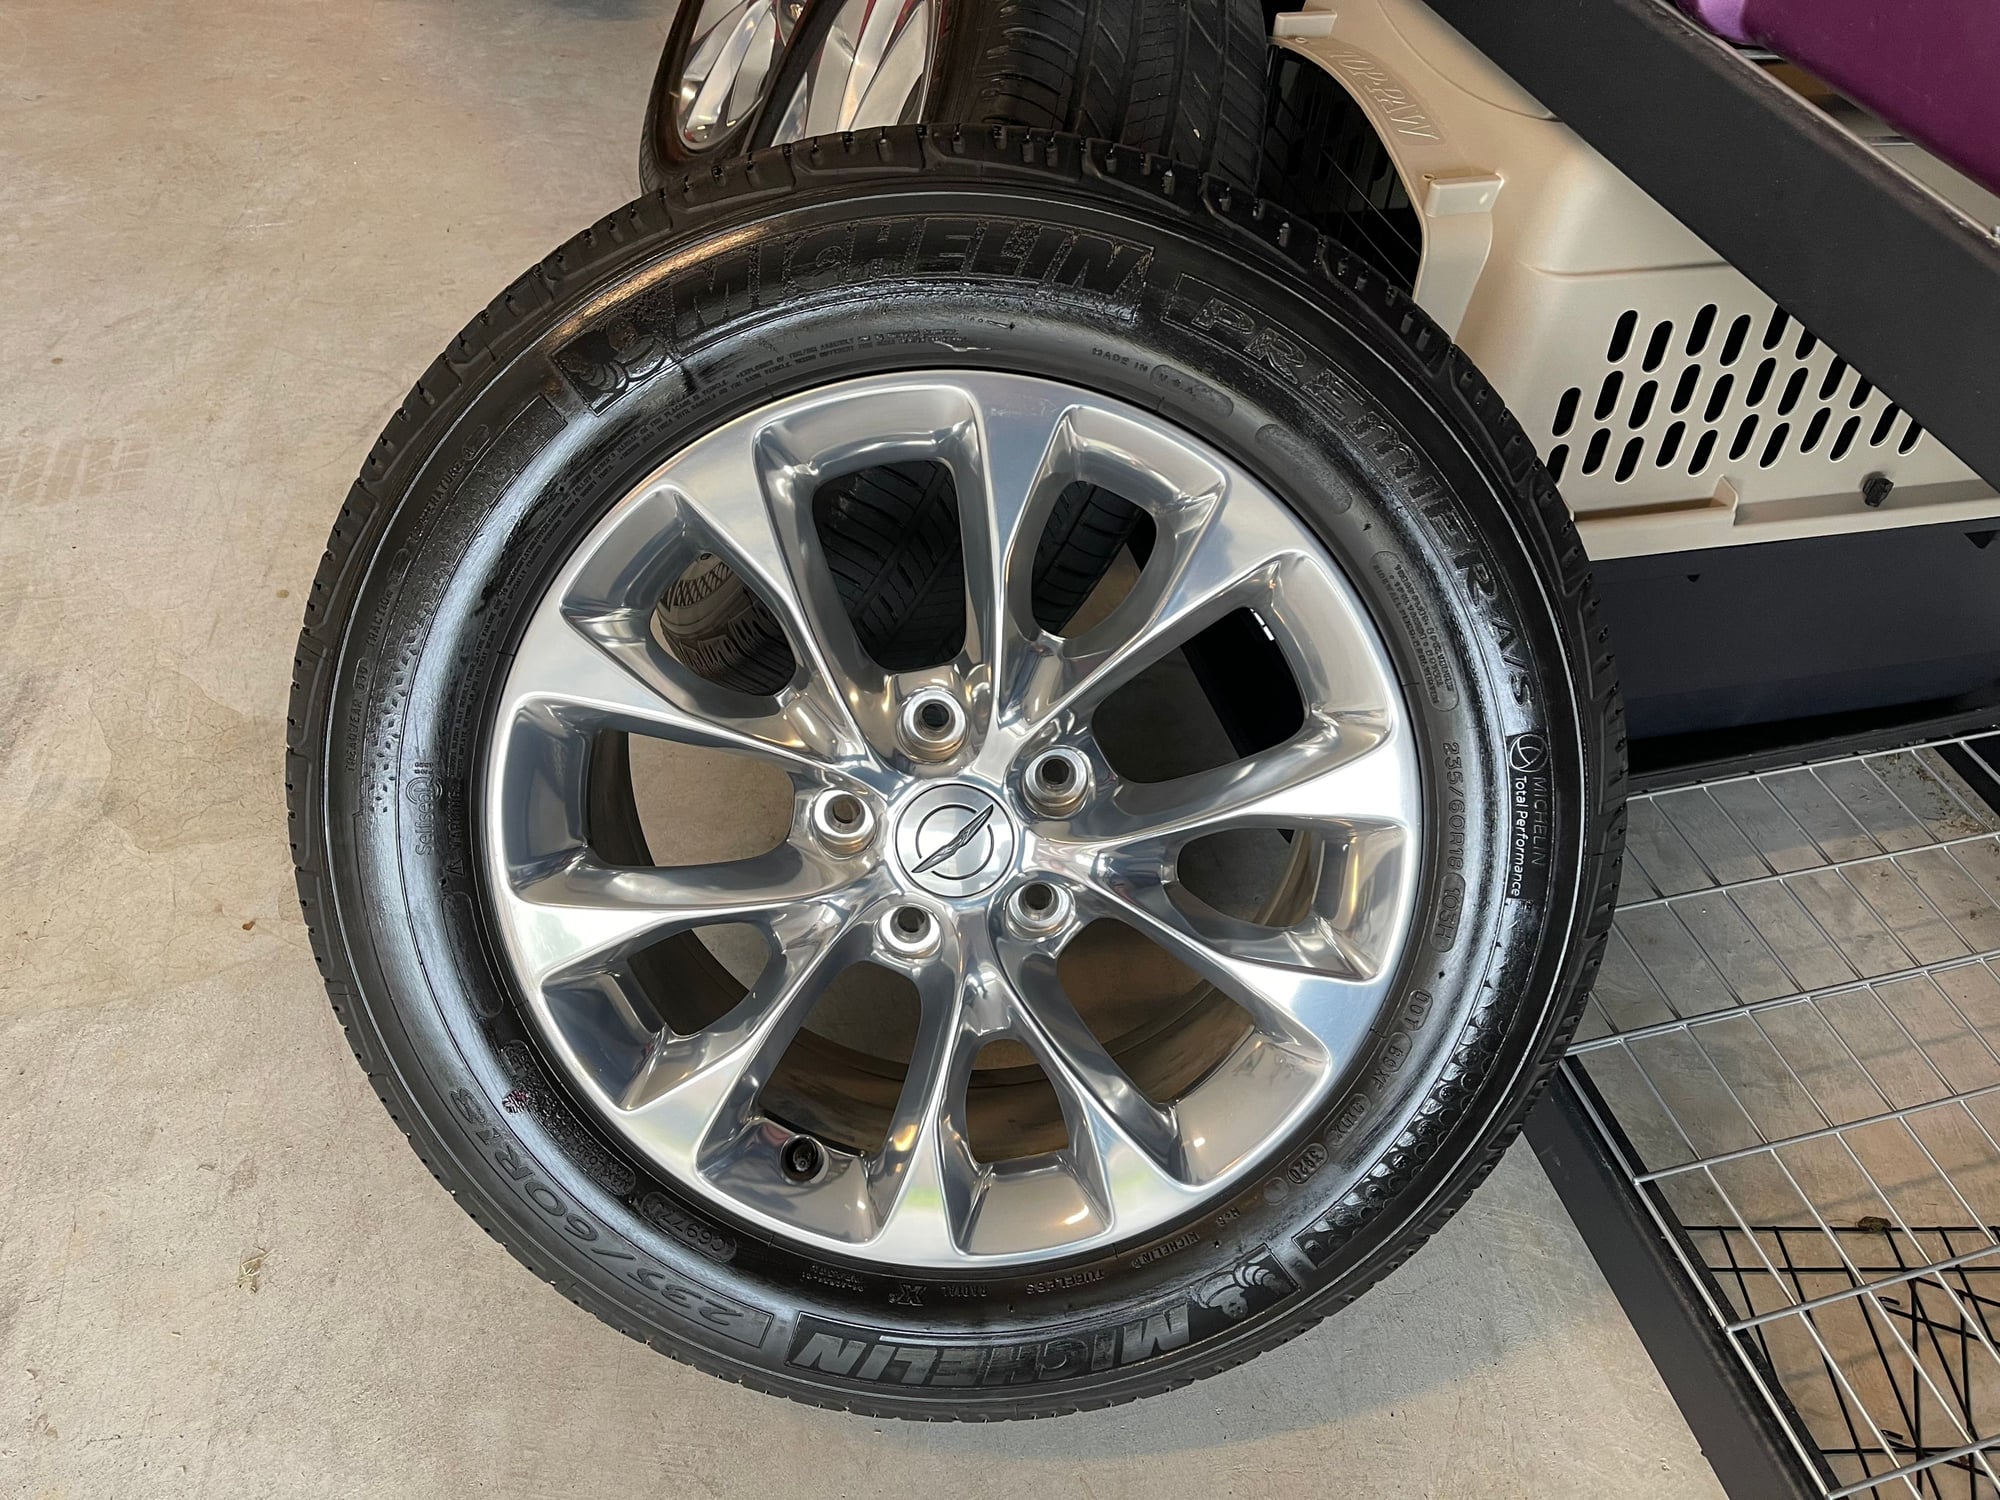 Wheels and Tires/Axles - 2021 OEM Pacifica 18" Wheels and Tires - Used - 2021 Chrysler Pacifica - Katy, TX 77493, United States